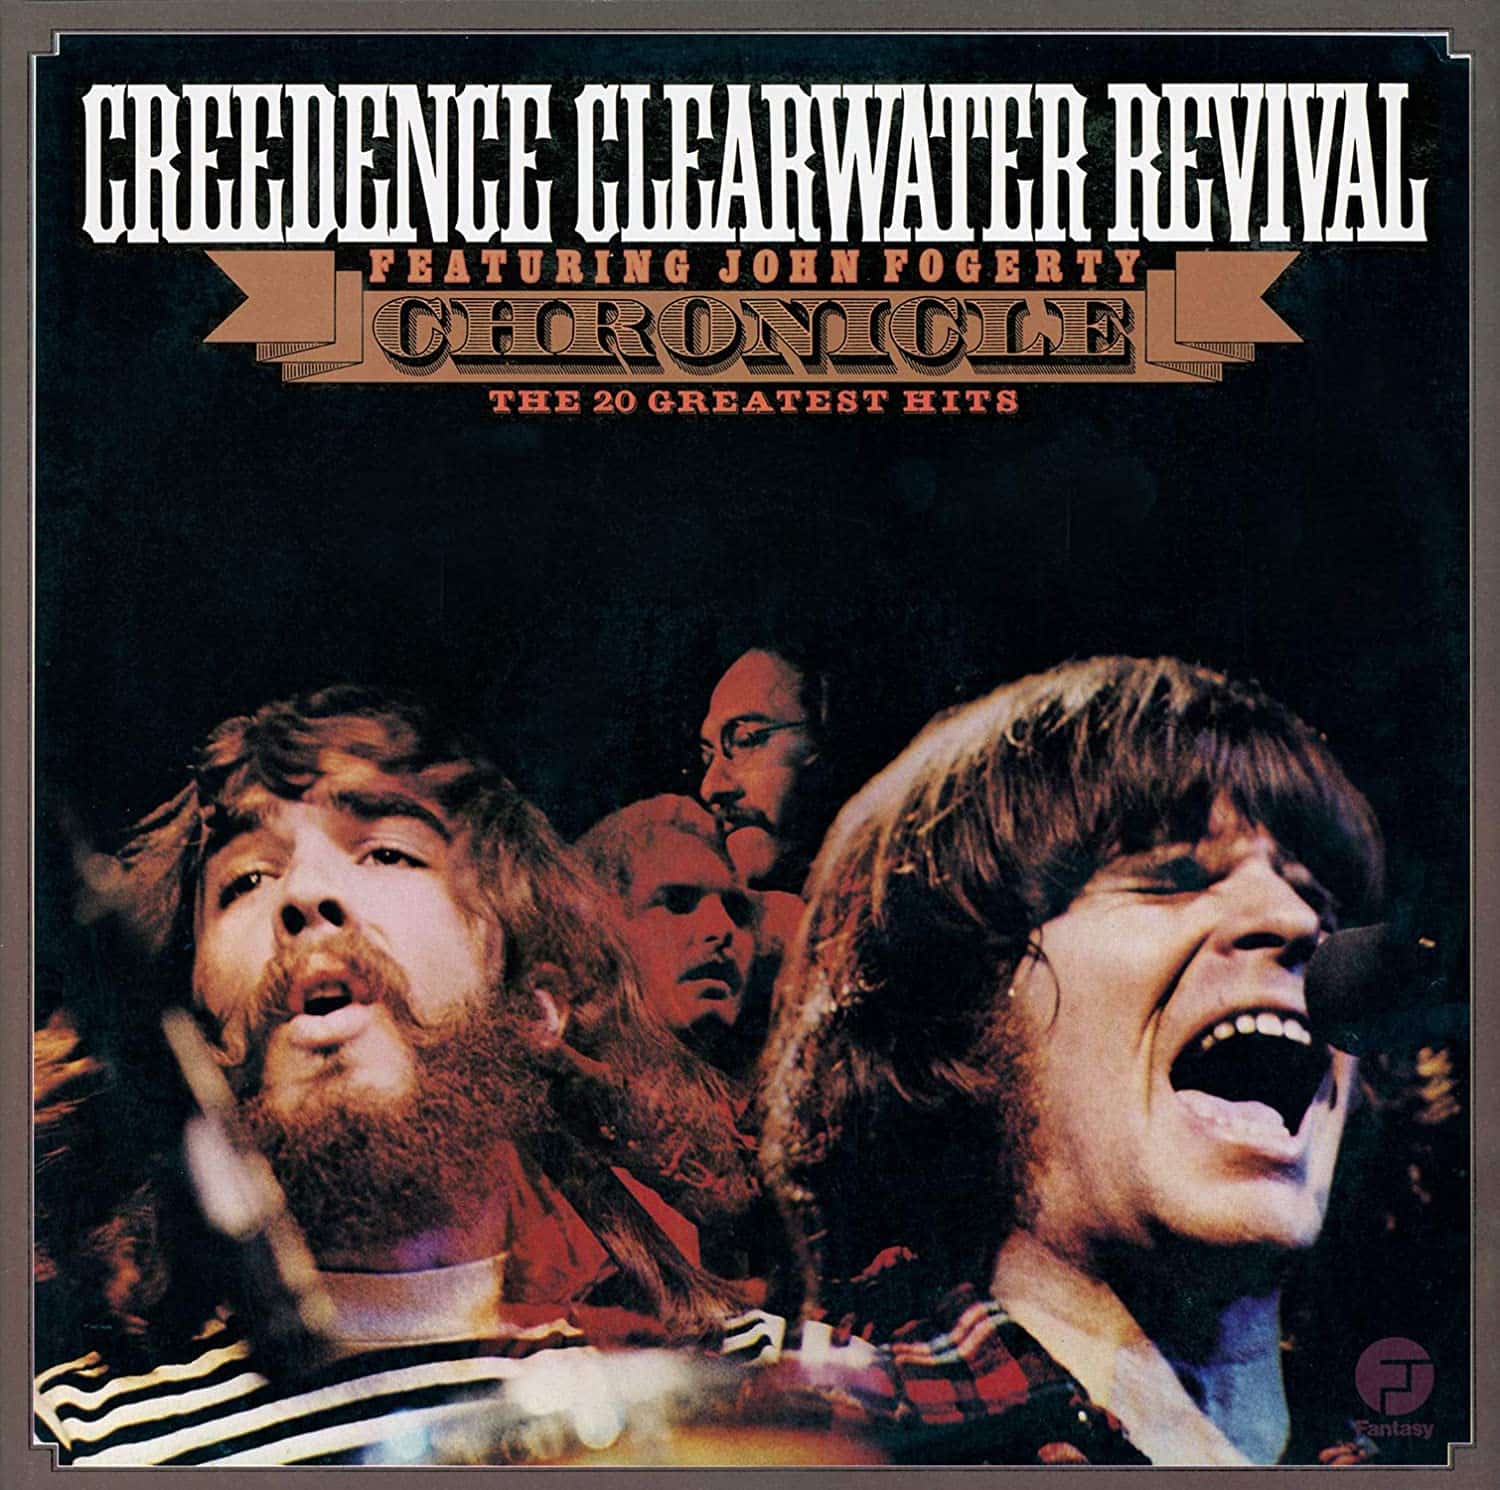 CREEDENCE CLEARWATER REVIVAL At The Royal Albert Hall (Clear Vinyl